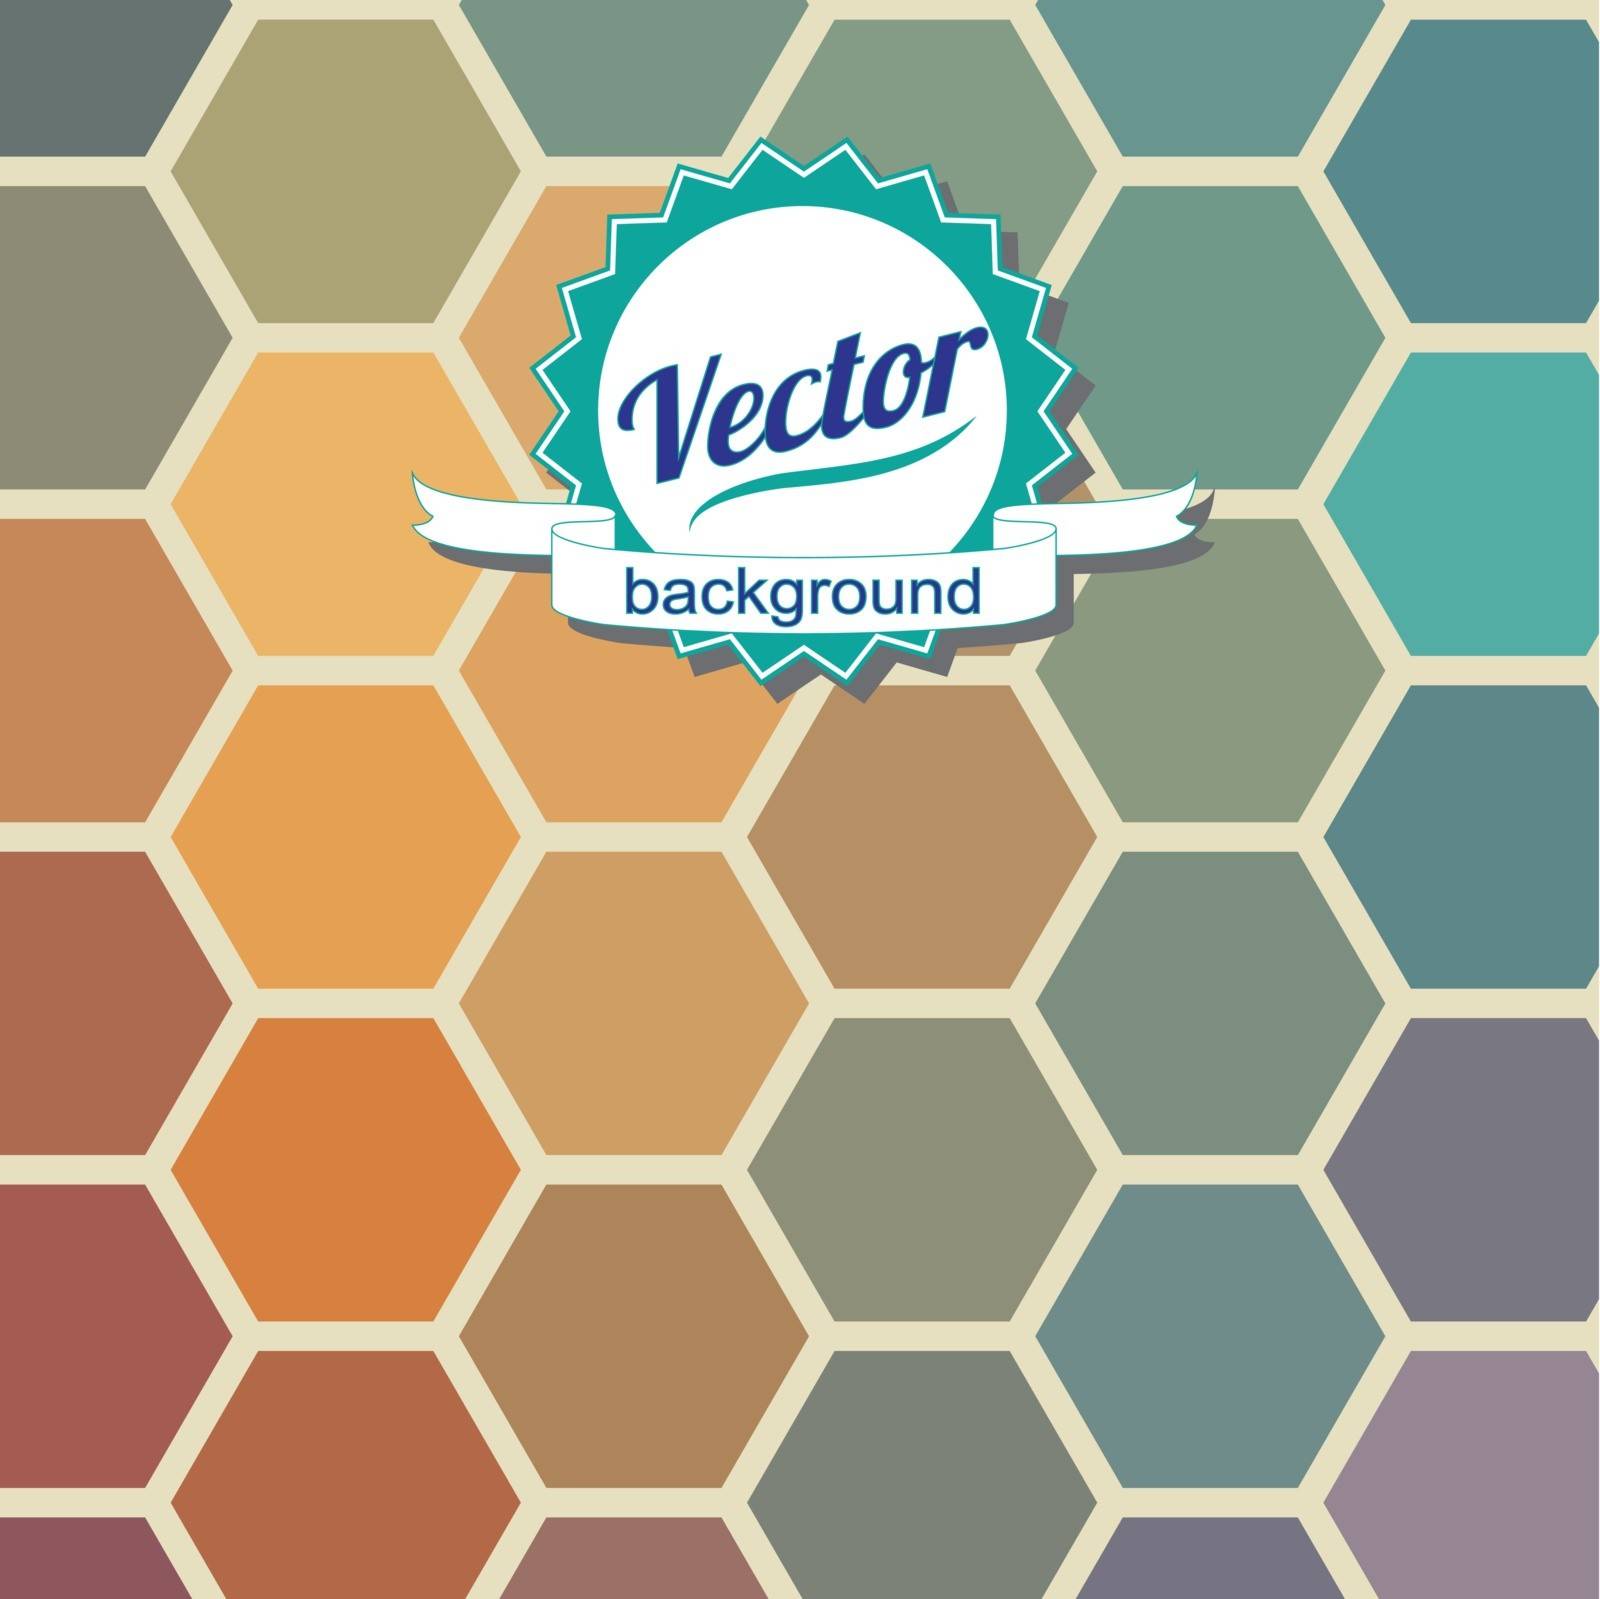 Retro pattern of geometric shapes  Colorful mosaic backdrop  Geometric background  ?lace your text on top